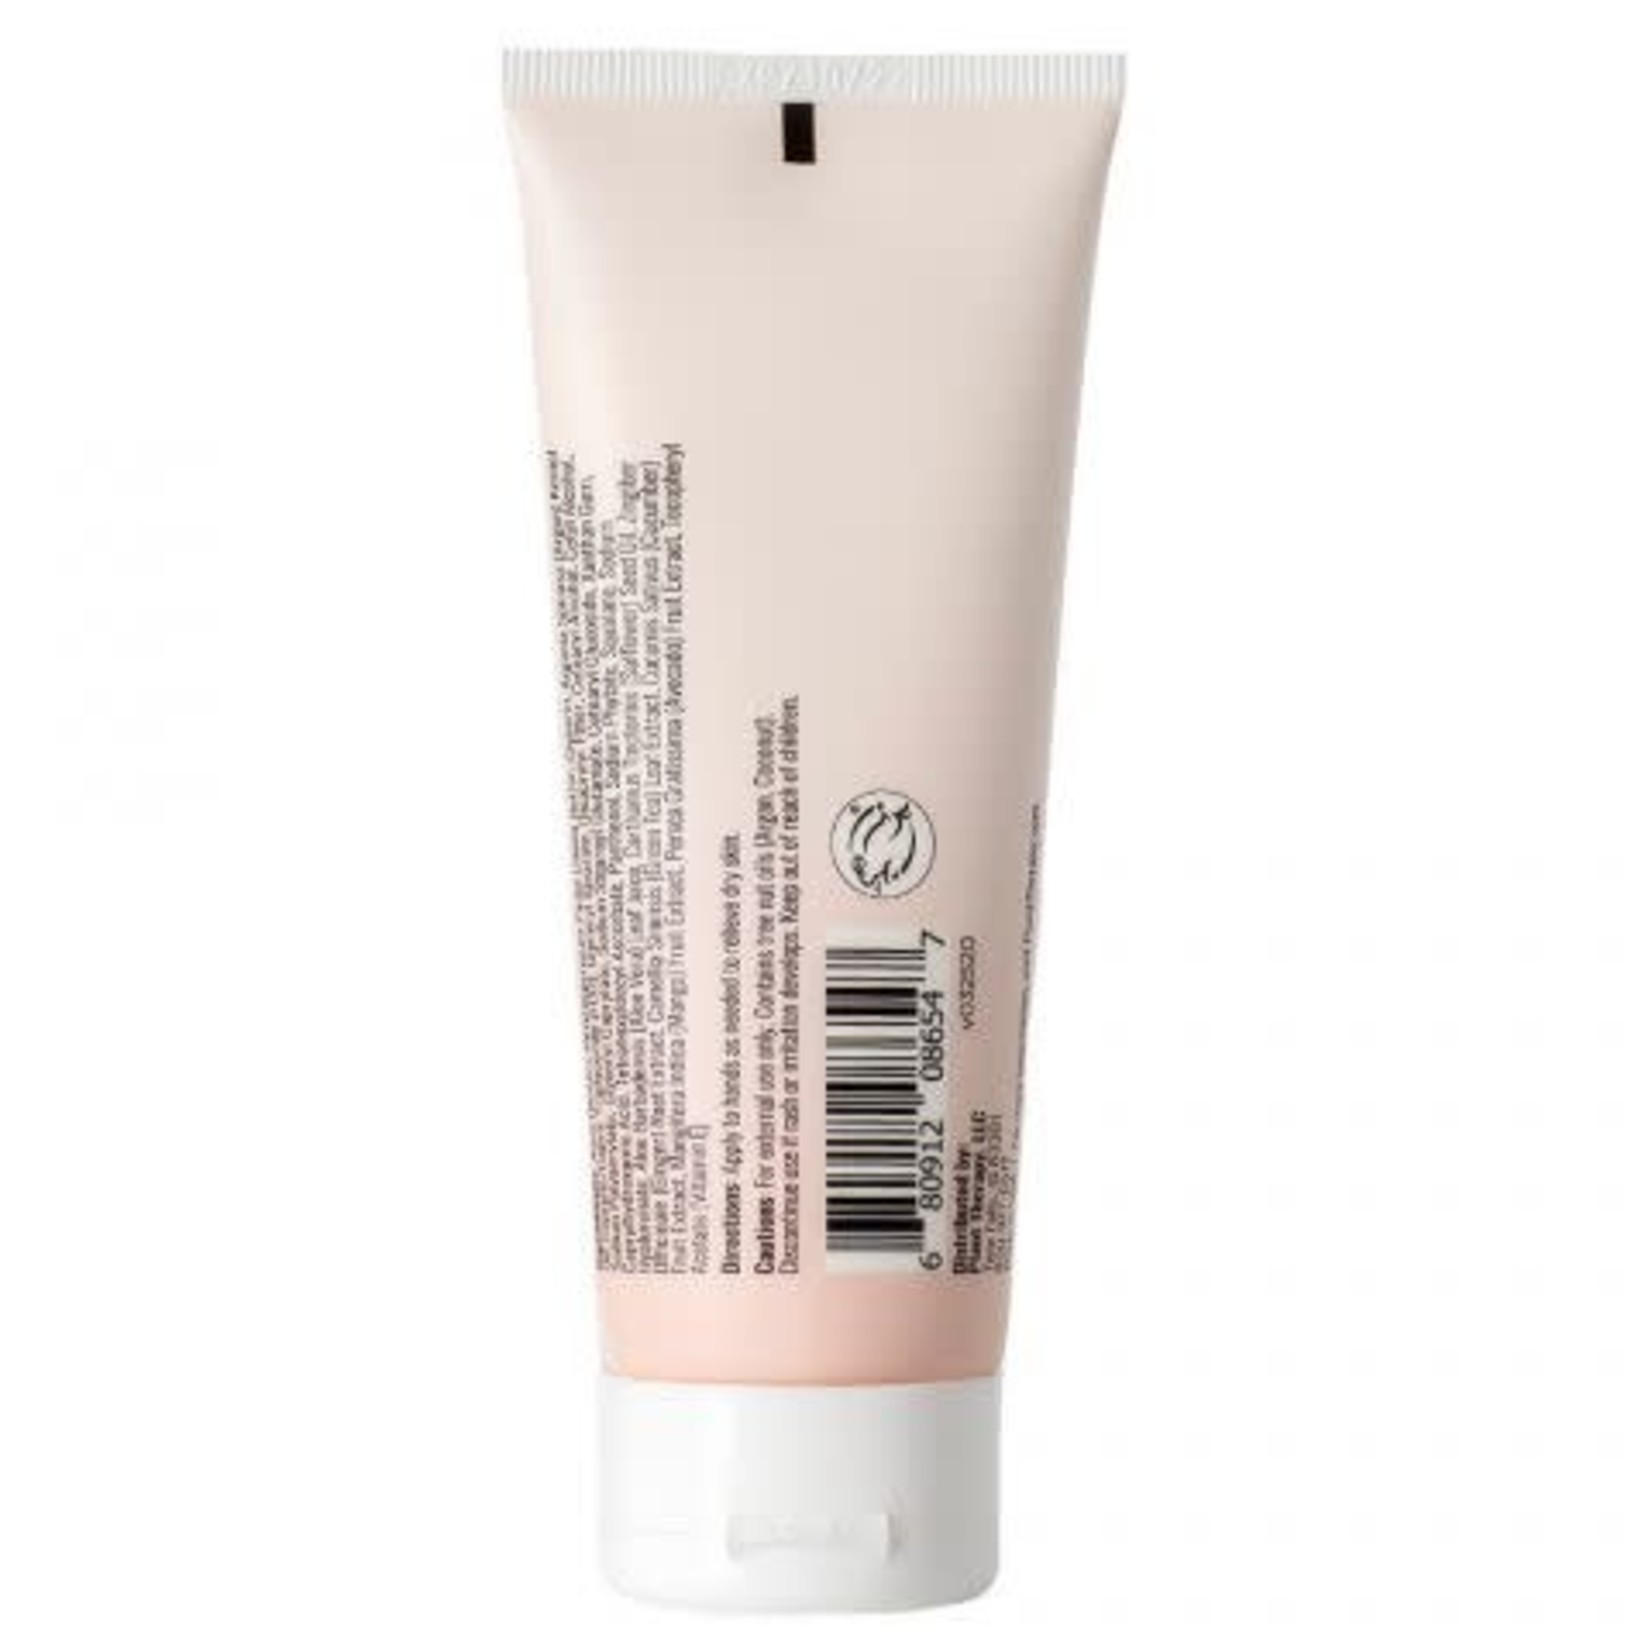 Plant Therapy PT Age Defying Hand Cream 2.5oz